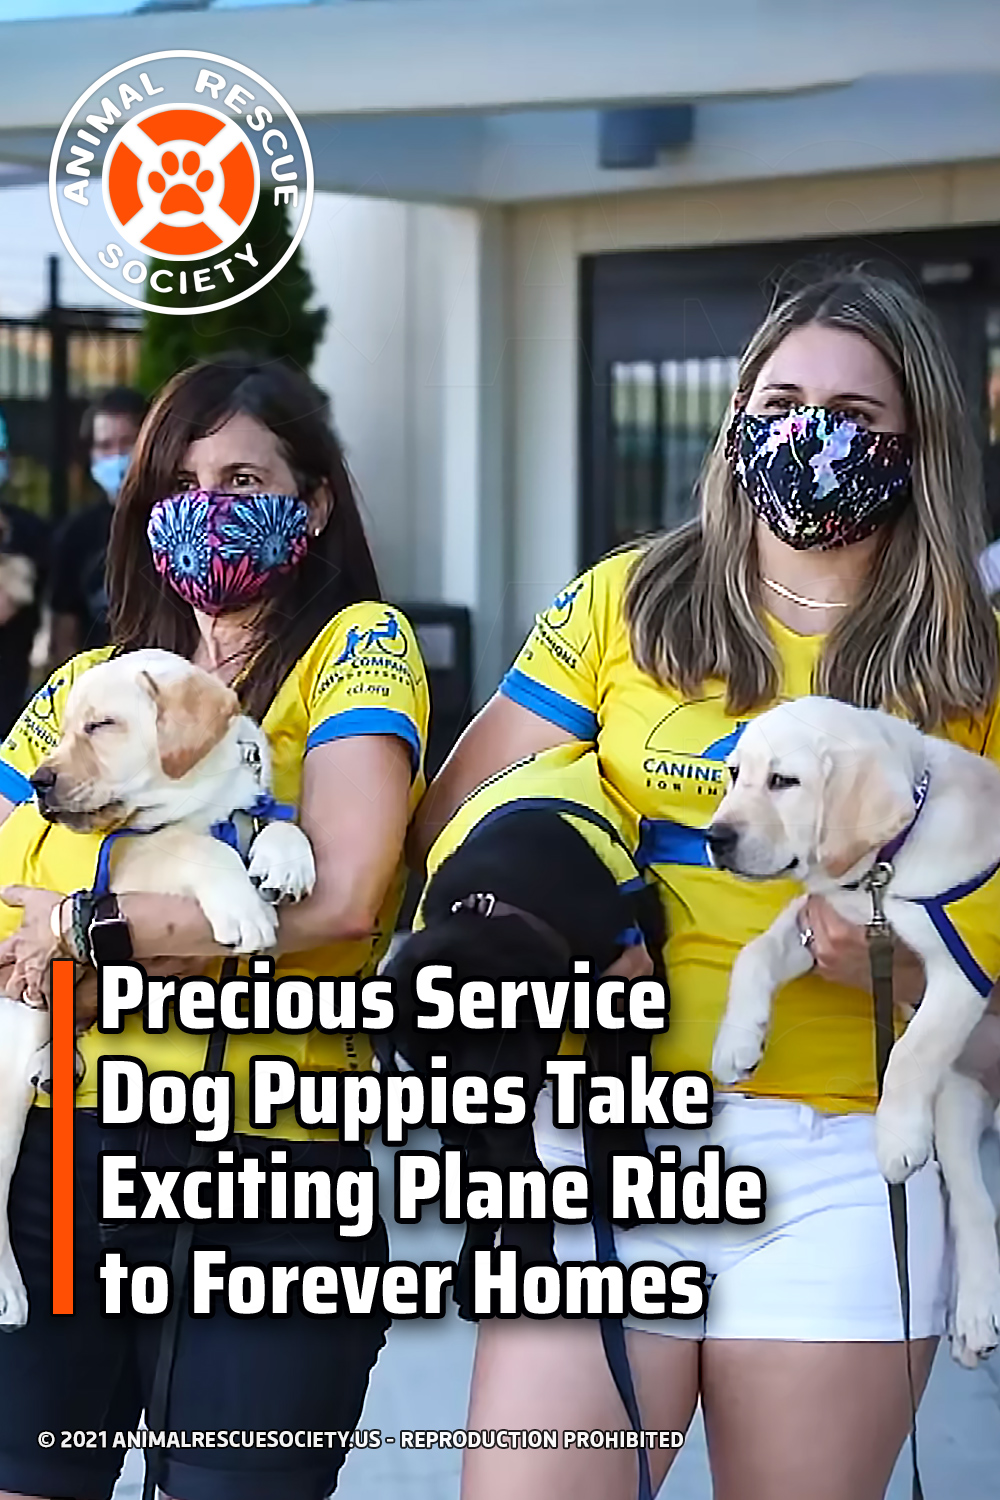 Precious Service Dog Puppies Take Exciting Plane Ride to Forever Homes